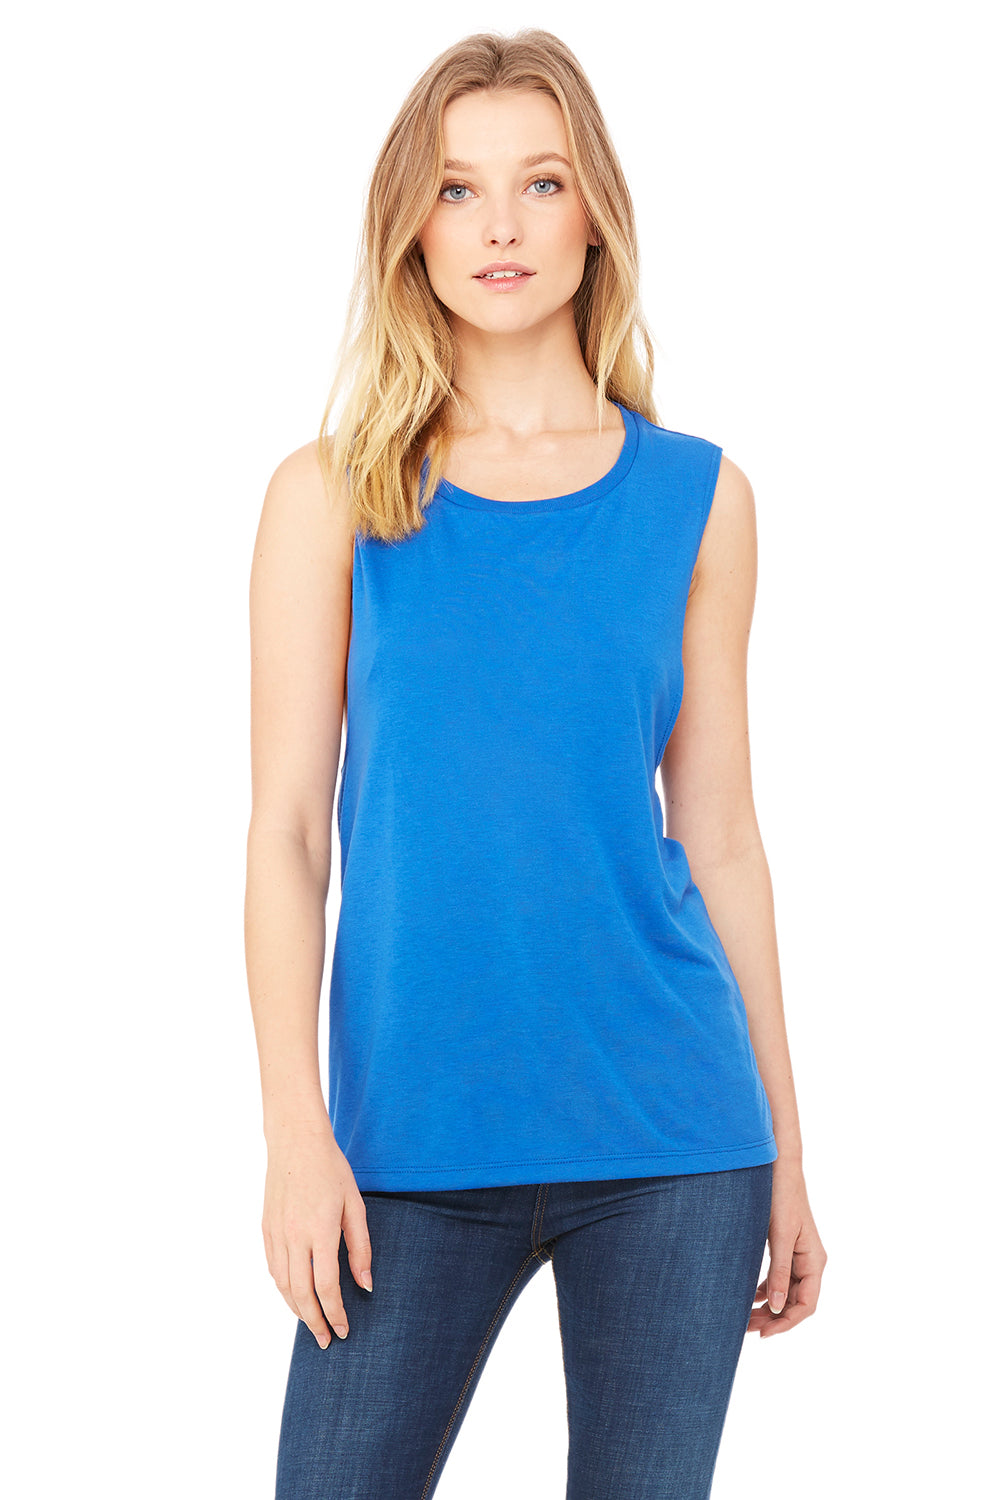 Bella + Canvas B8803 Womens Flowy Muscle Tank Top Royal Blue Front